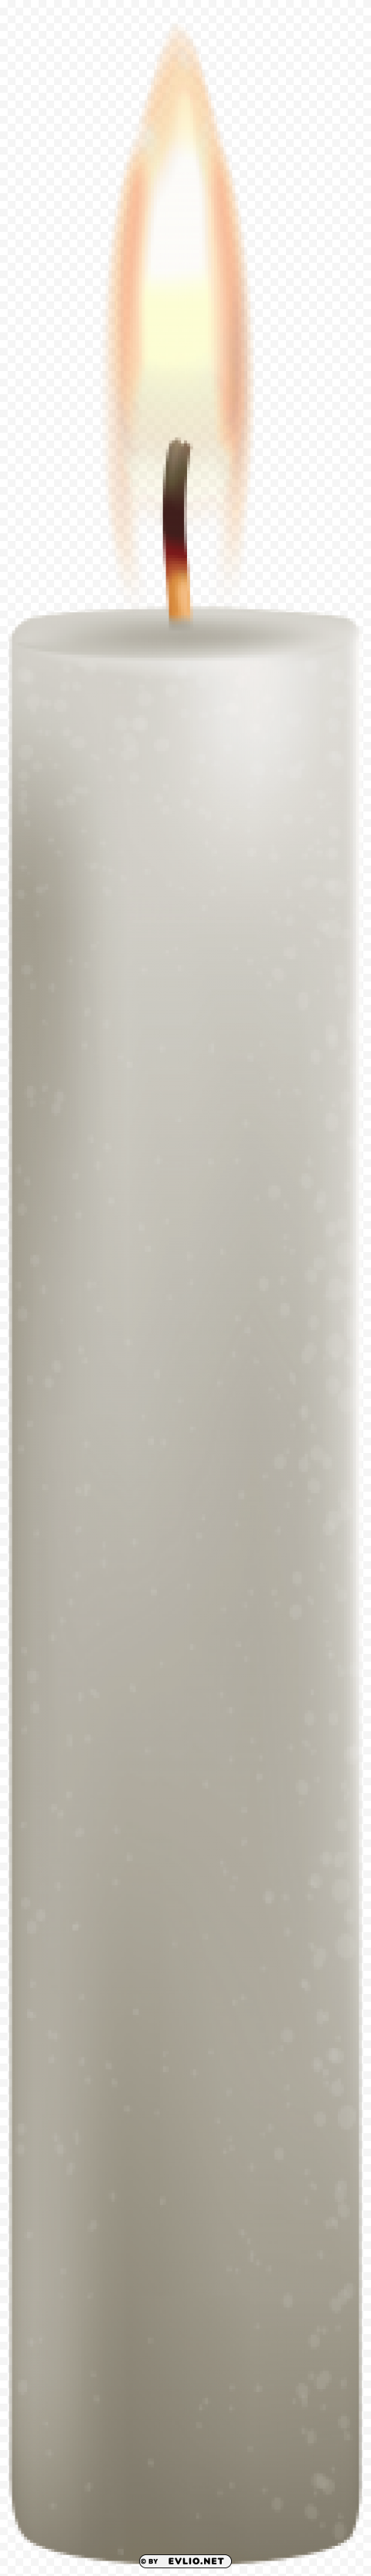 white candle PNG photo with transparency